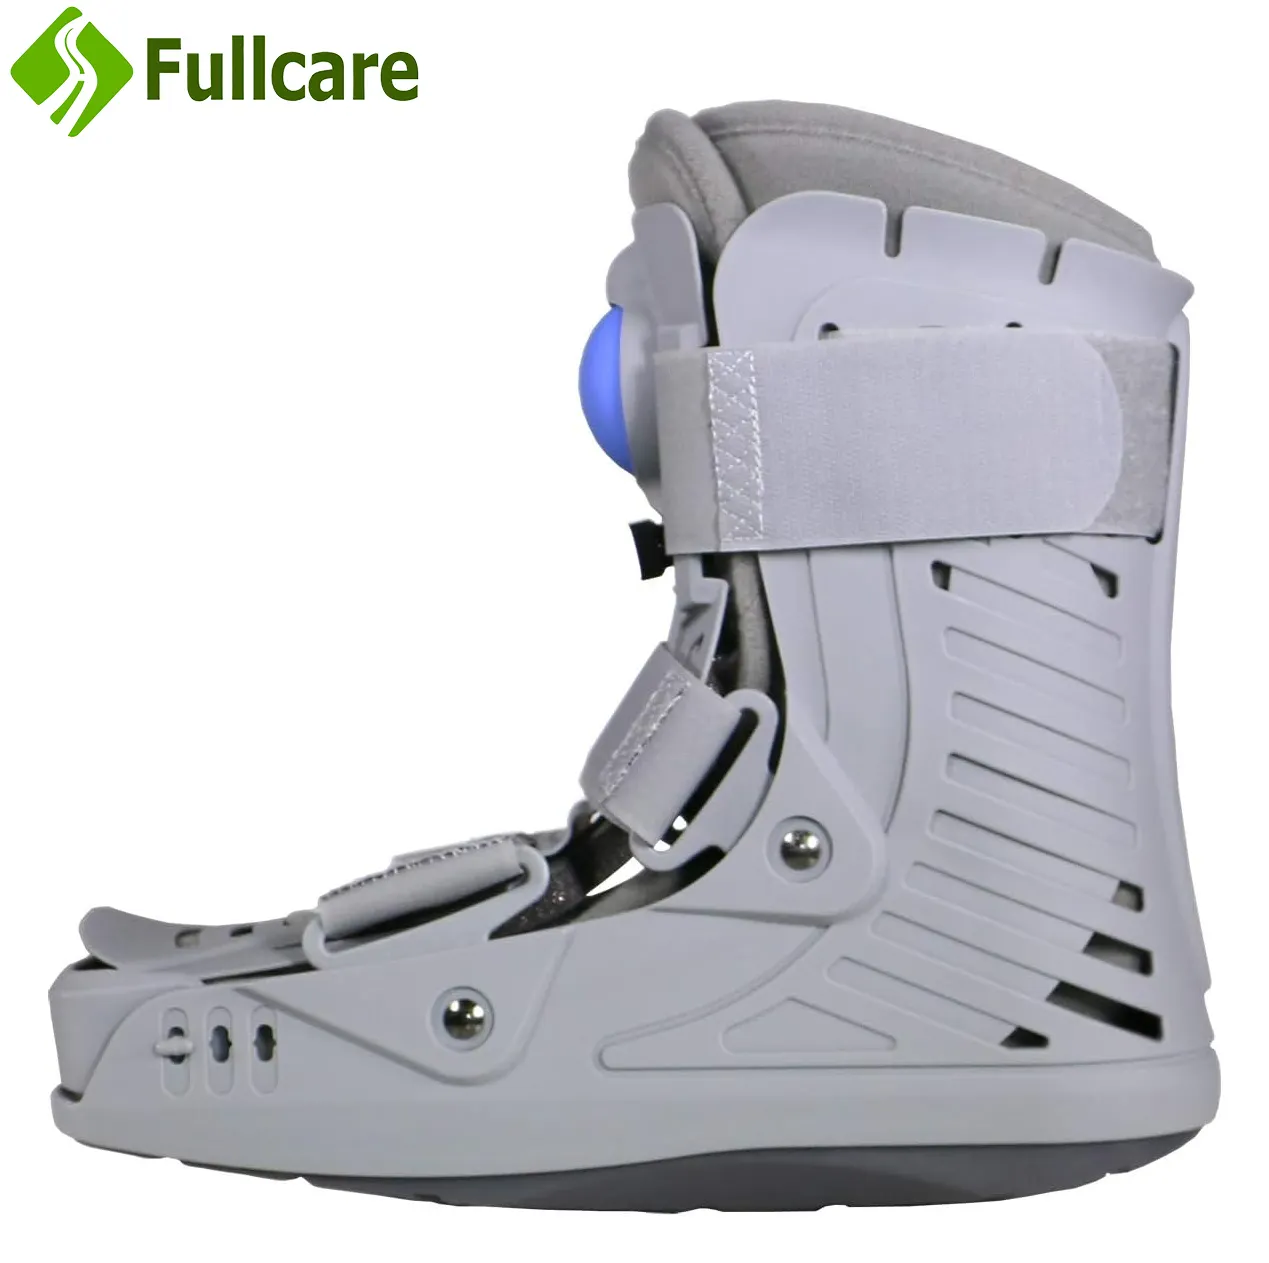 Hot selling Unisex Grey Orthopedic Low Top Walking Boot Brace Inflatable Air Walker Support Medical Ankle Walking Boot Support